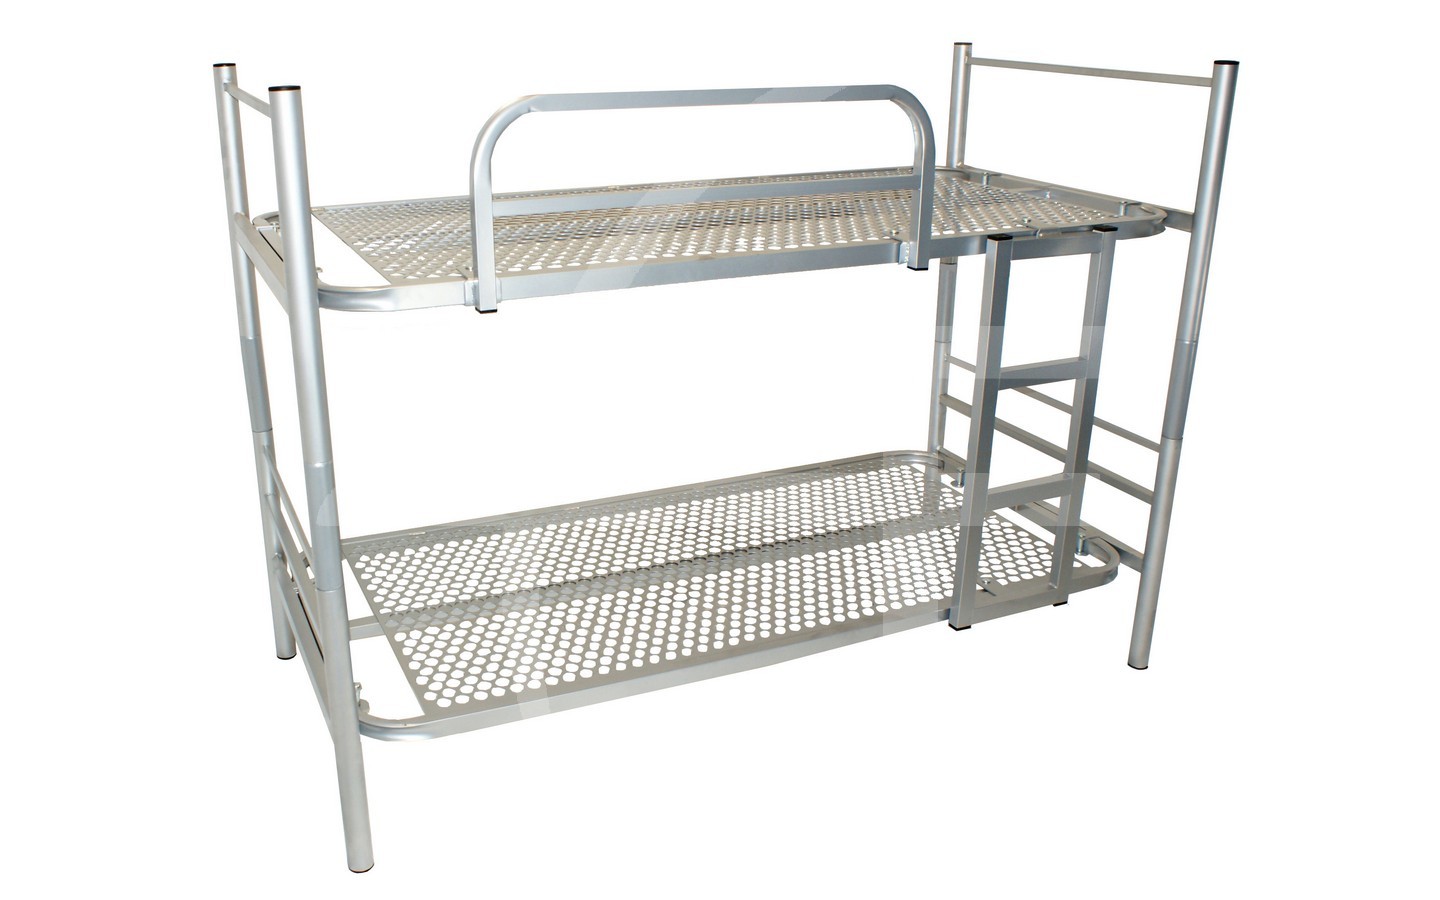 Steel Bunk Beds Military, Metal Bed Frame With Mesh Base